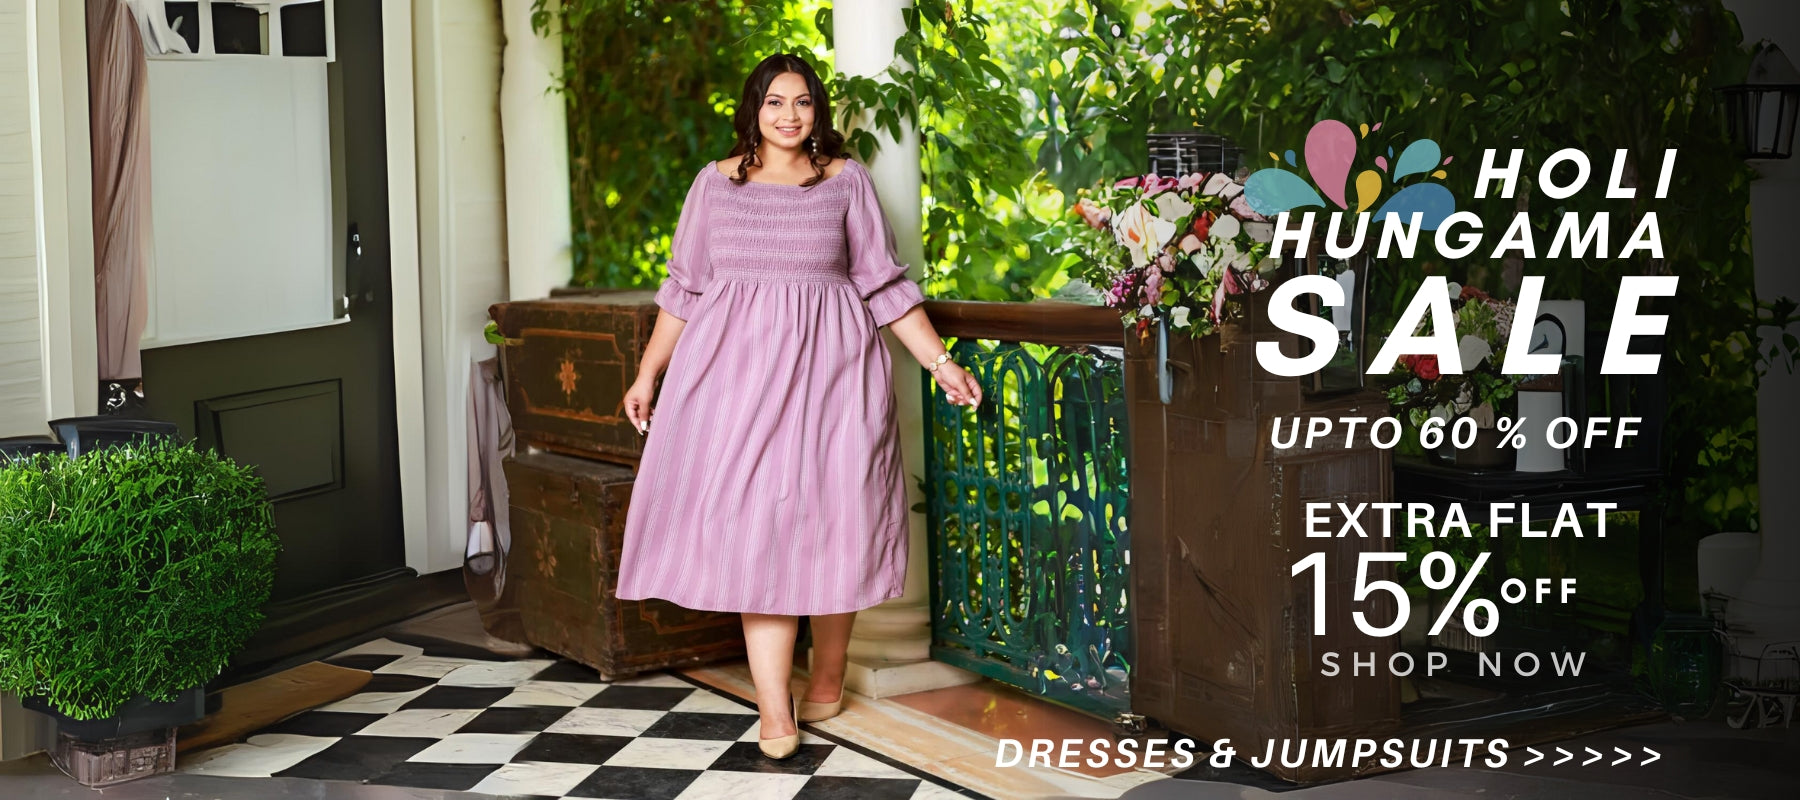 Trendy dresses for plus size women who love to stay in style |The Pink Moon